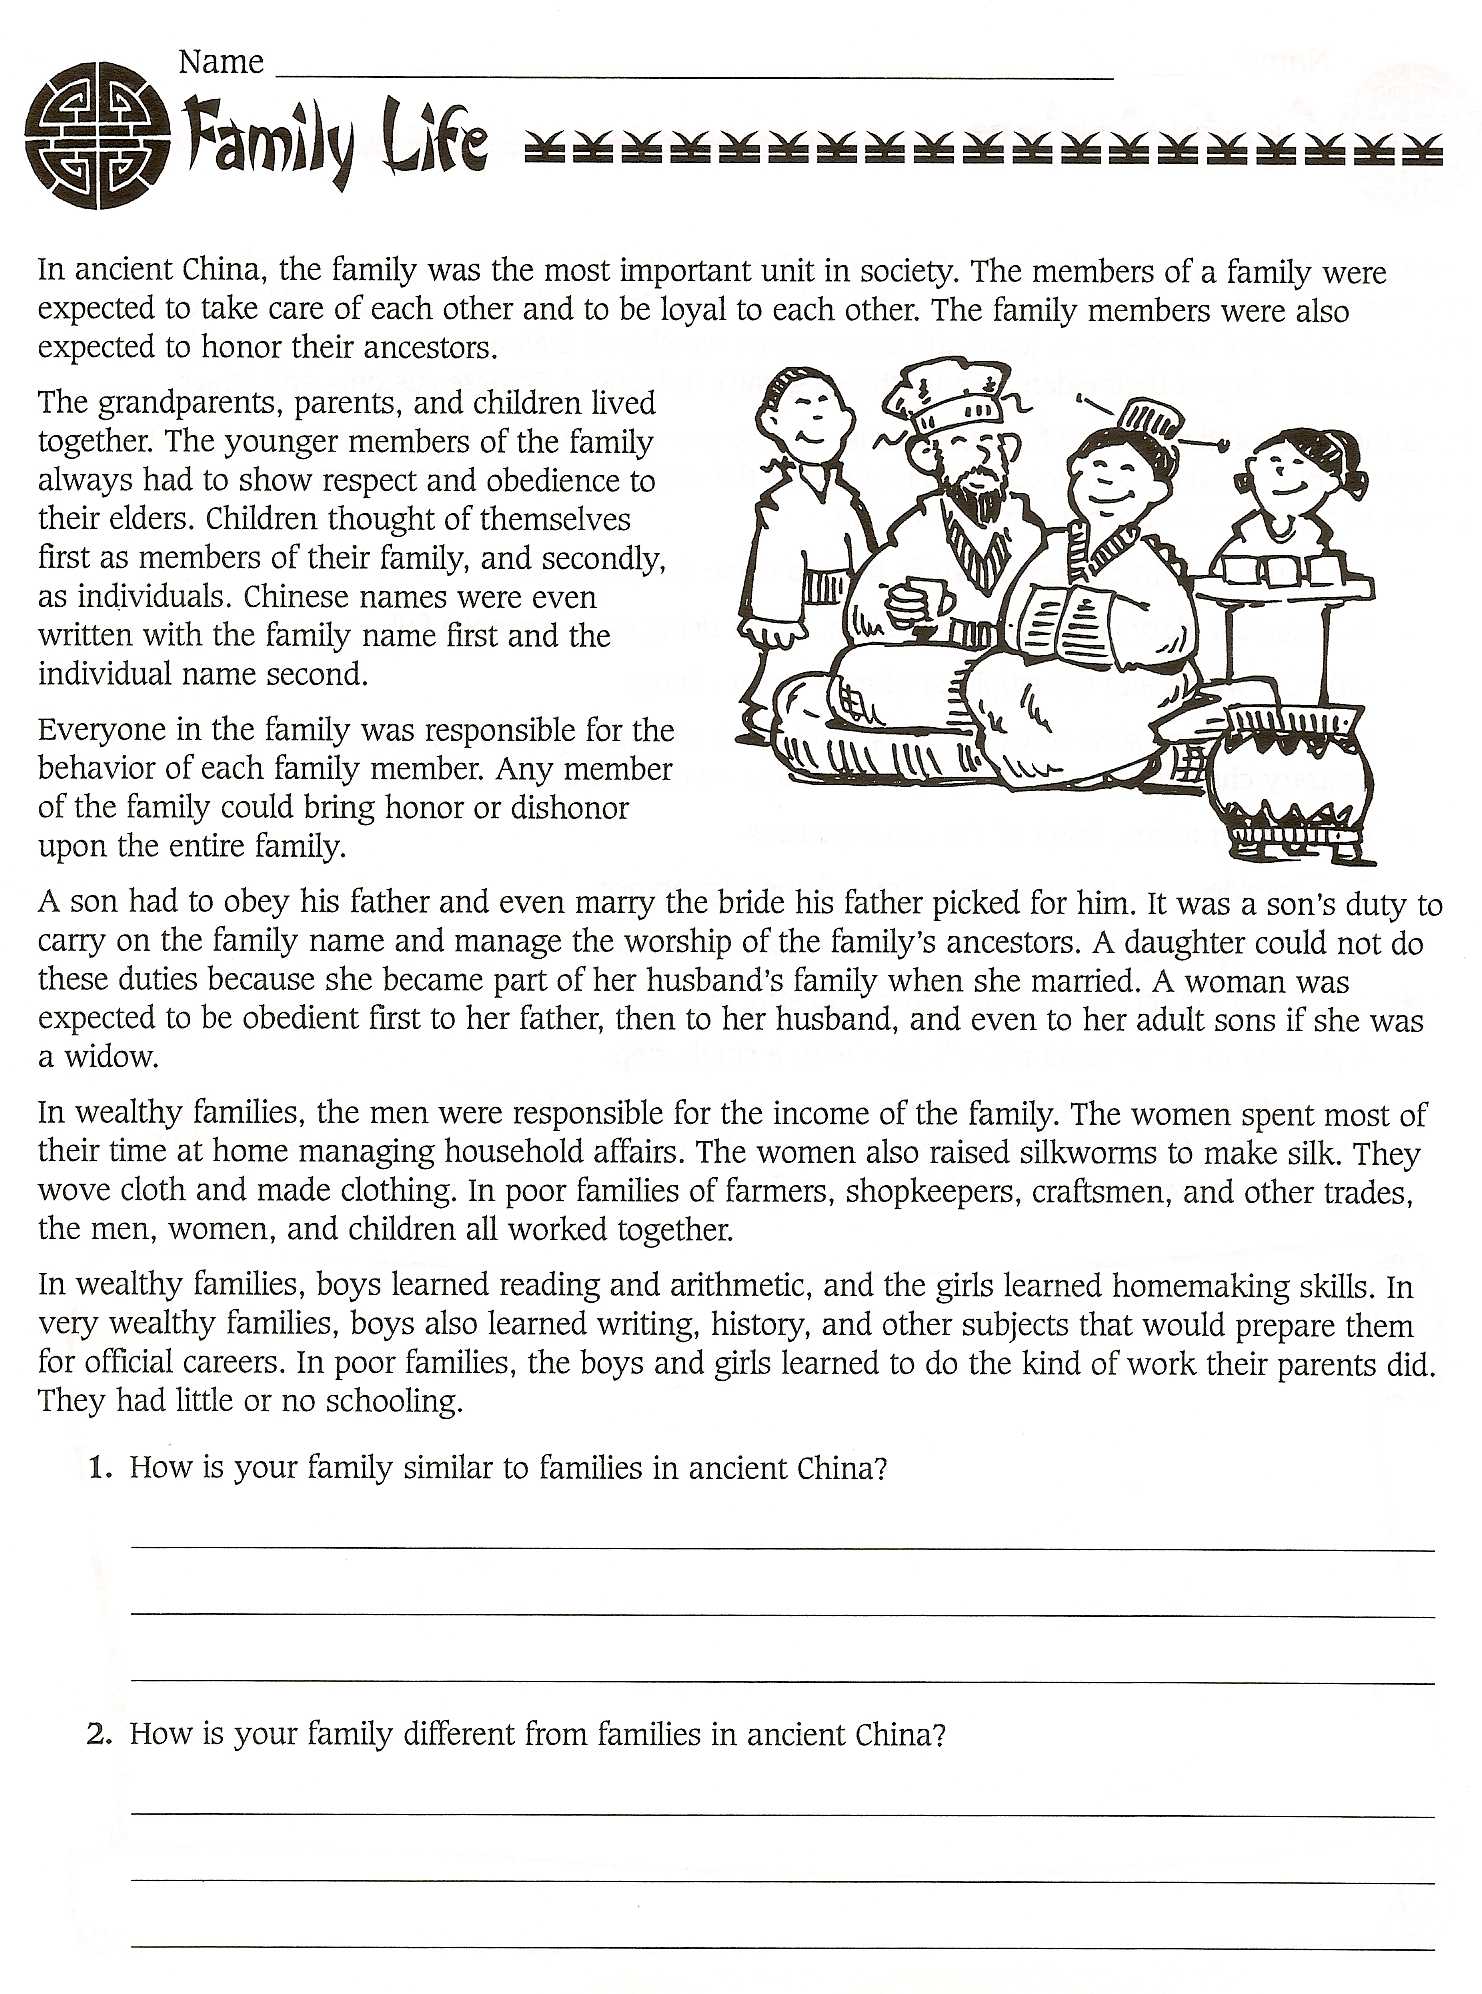 Citing Textual Evidence Worksheet 6th Grade together with Kids 6th Grade Literacy Activities File Th Grade English Grammar